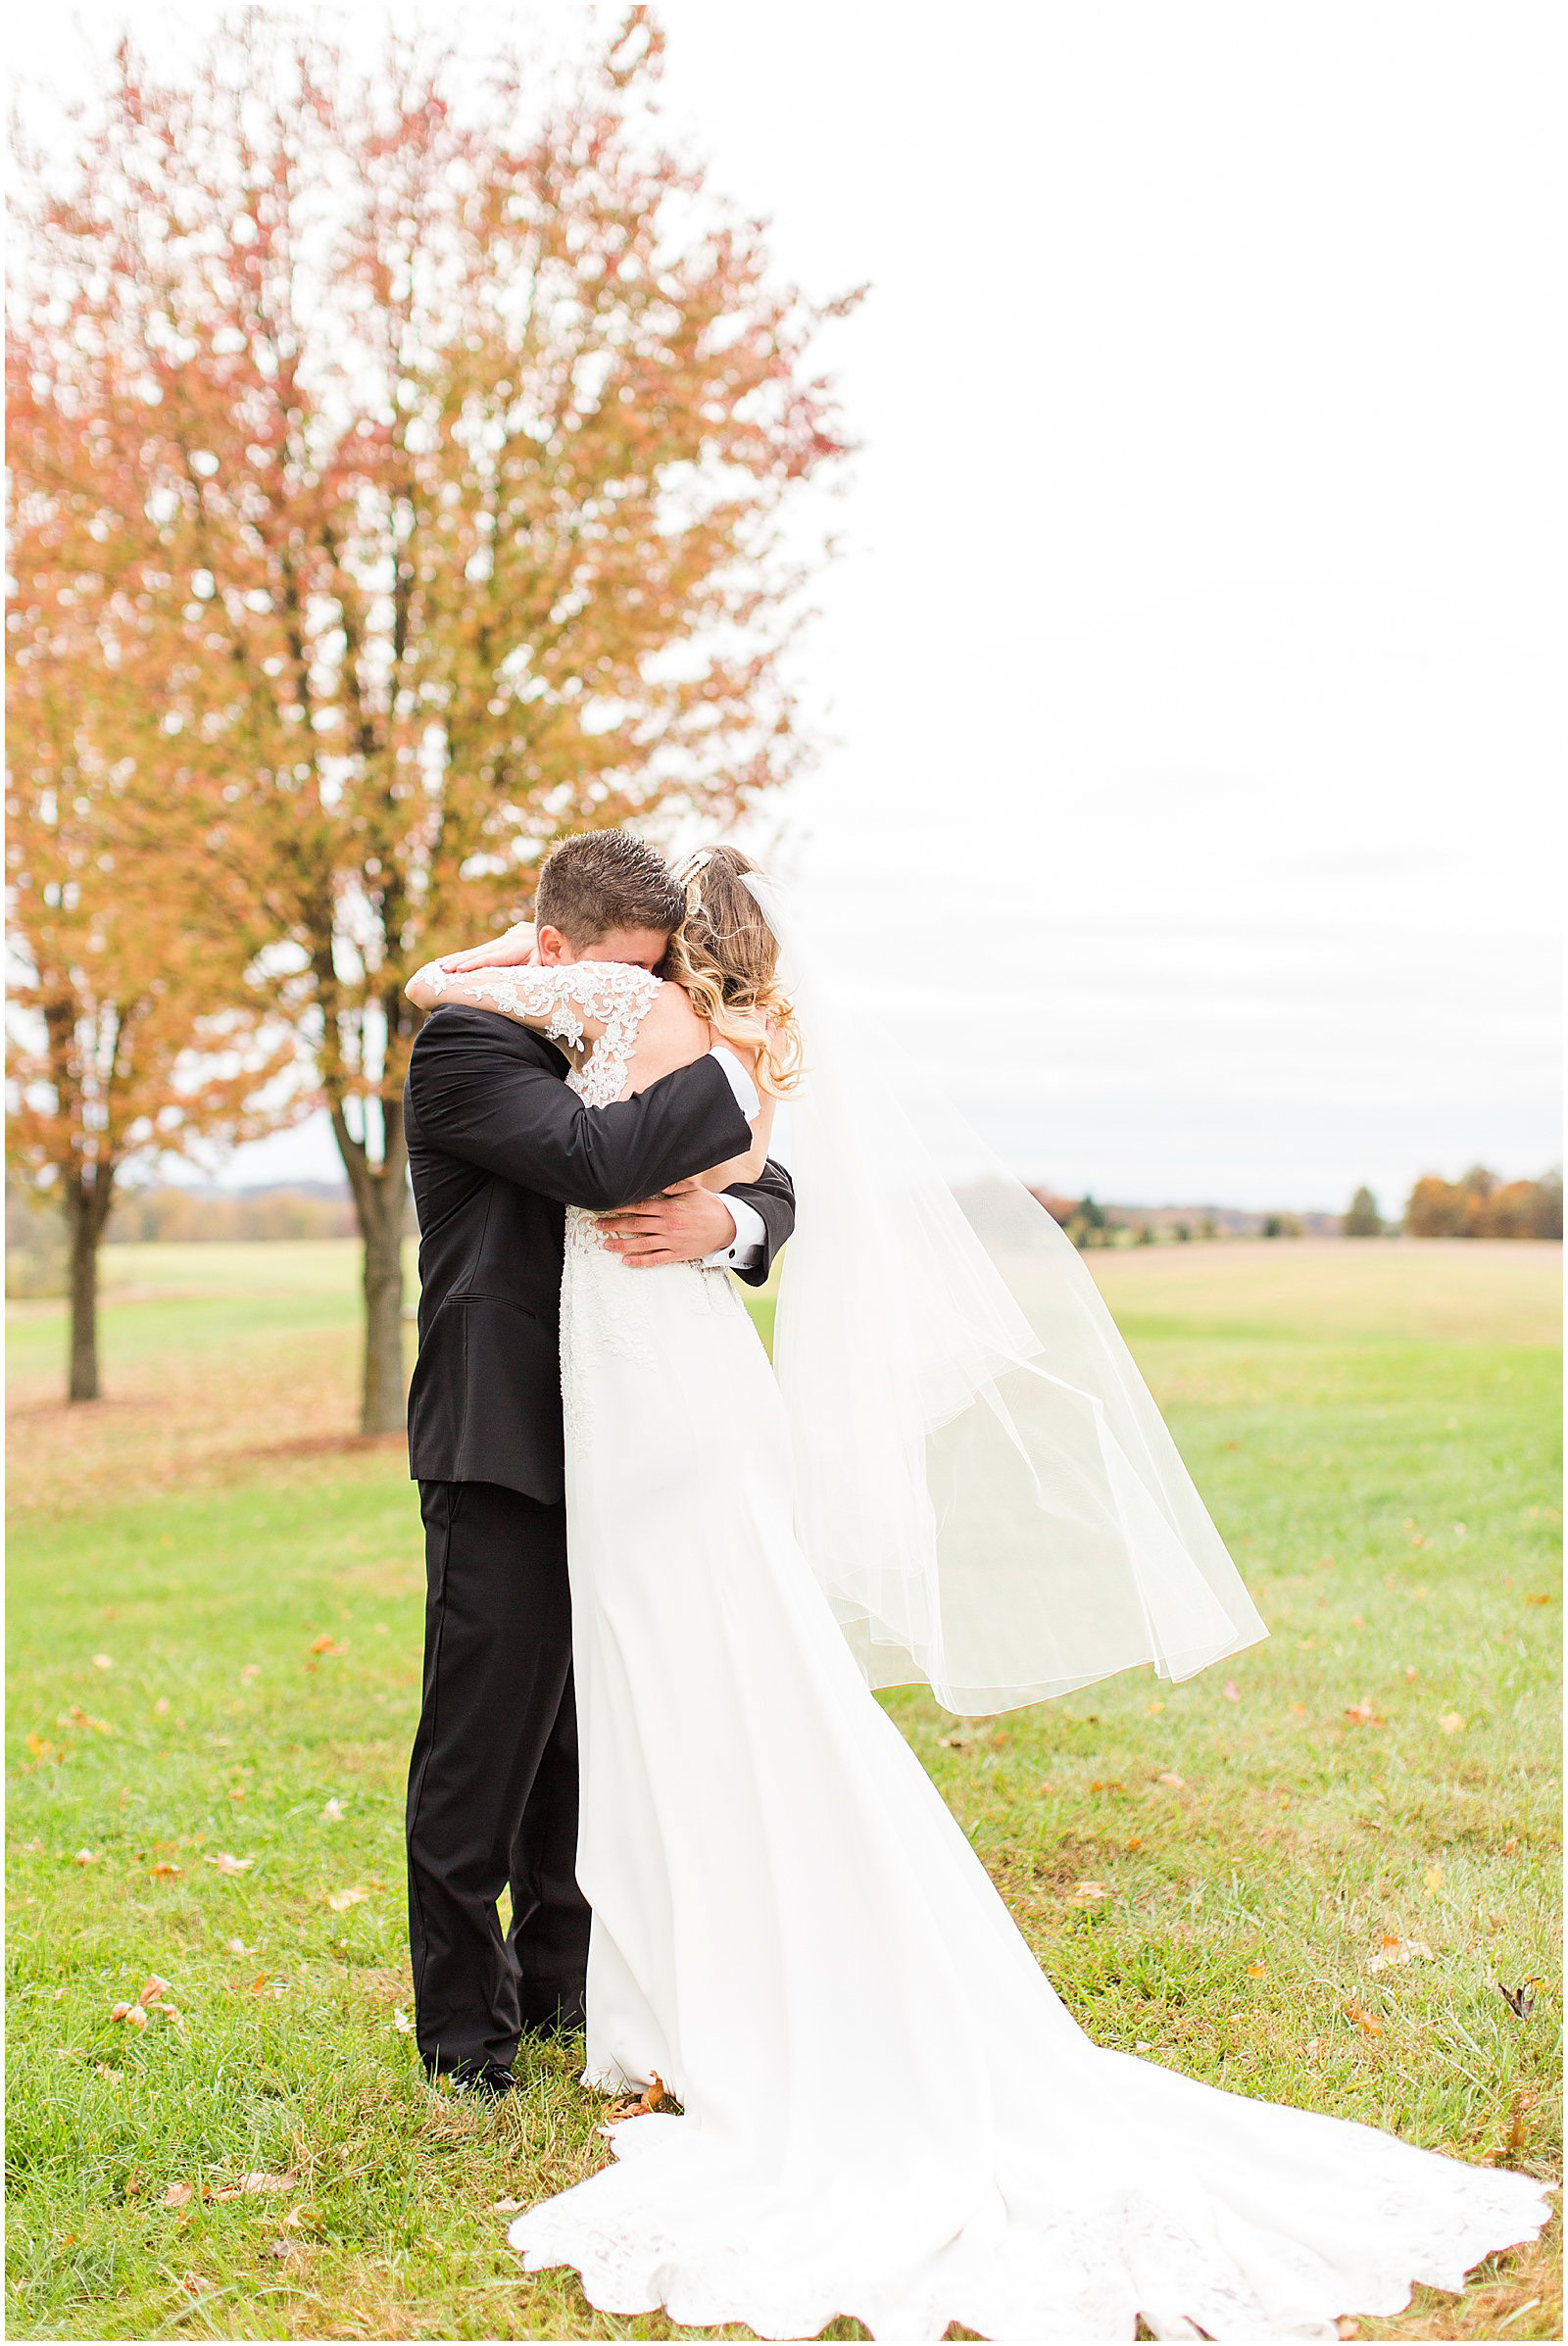 A Romantic Fall Wedding in Ferdinand, IN | Tori and Kyle | Bret and Brandie Photography 0054-2.jpg